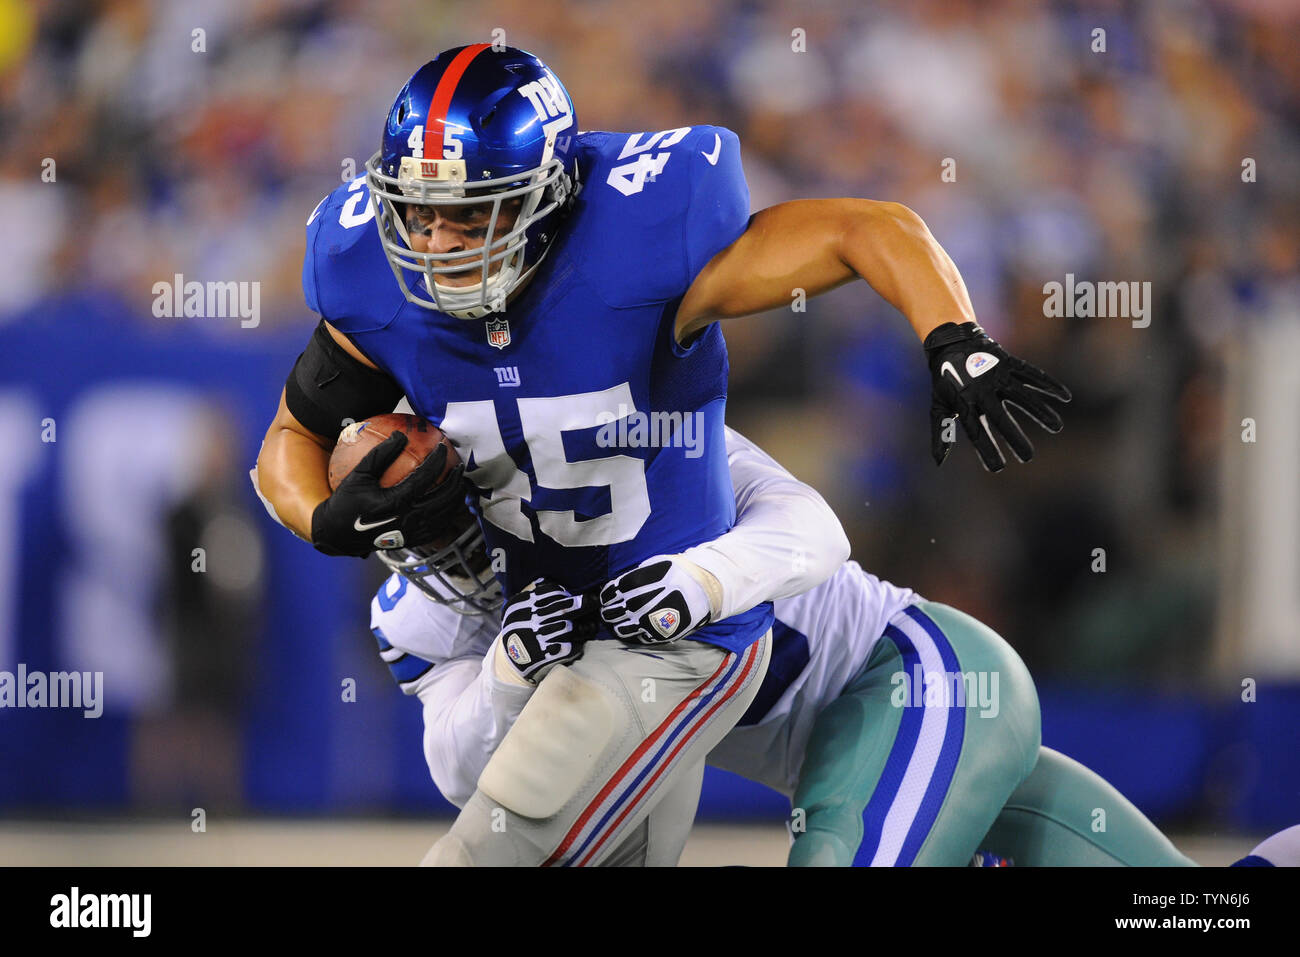 New York Giants running back Henry Hynoski (45) carries the ball against  the Dallas Cowboys in the third quarter in week 1 of the NFL season at  MetLife Stadium in East Rutherford,